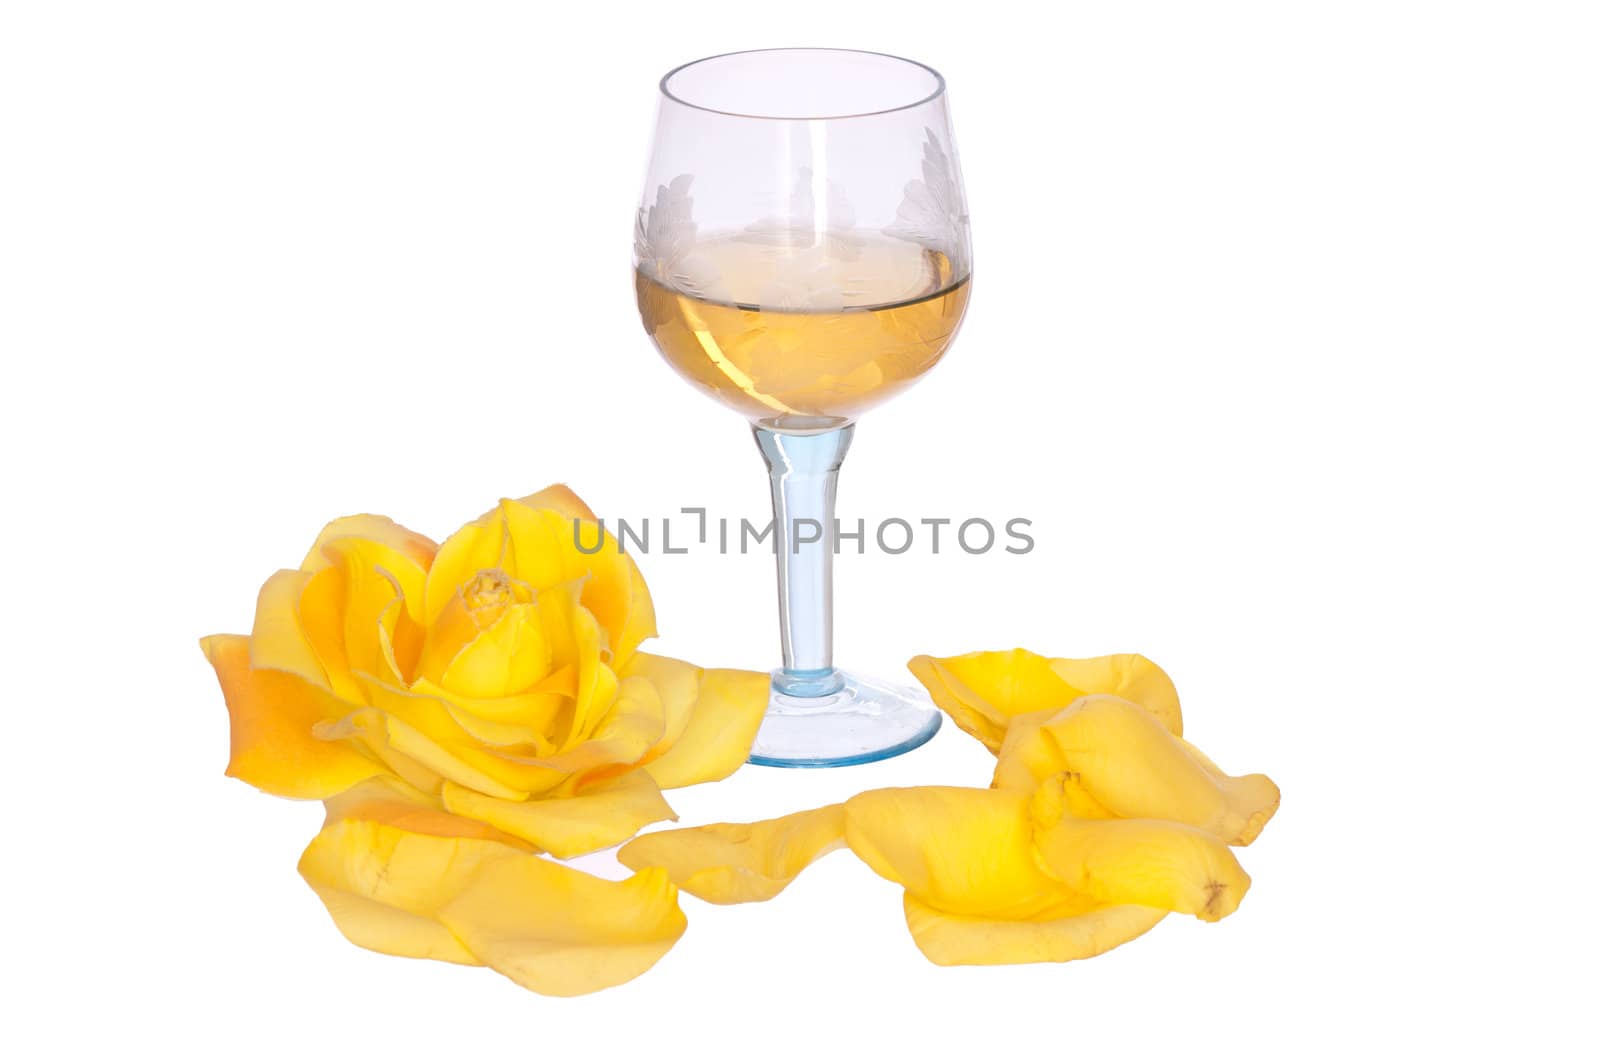 tumbler with white wine and yellow rose on the party